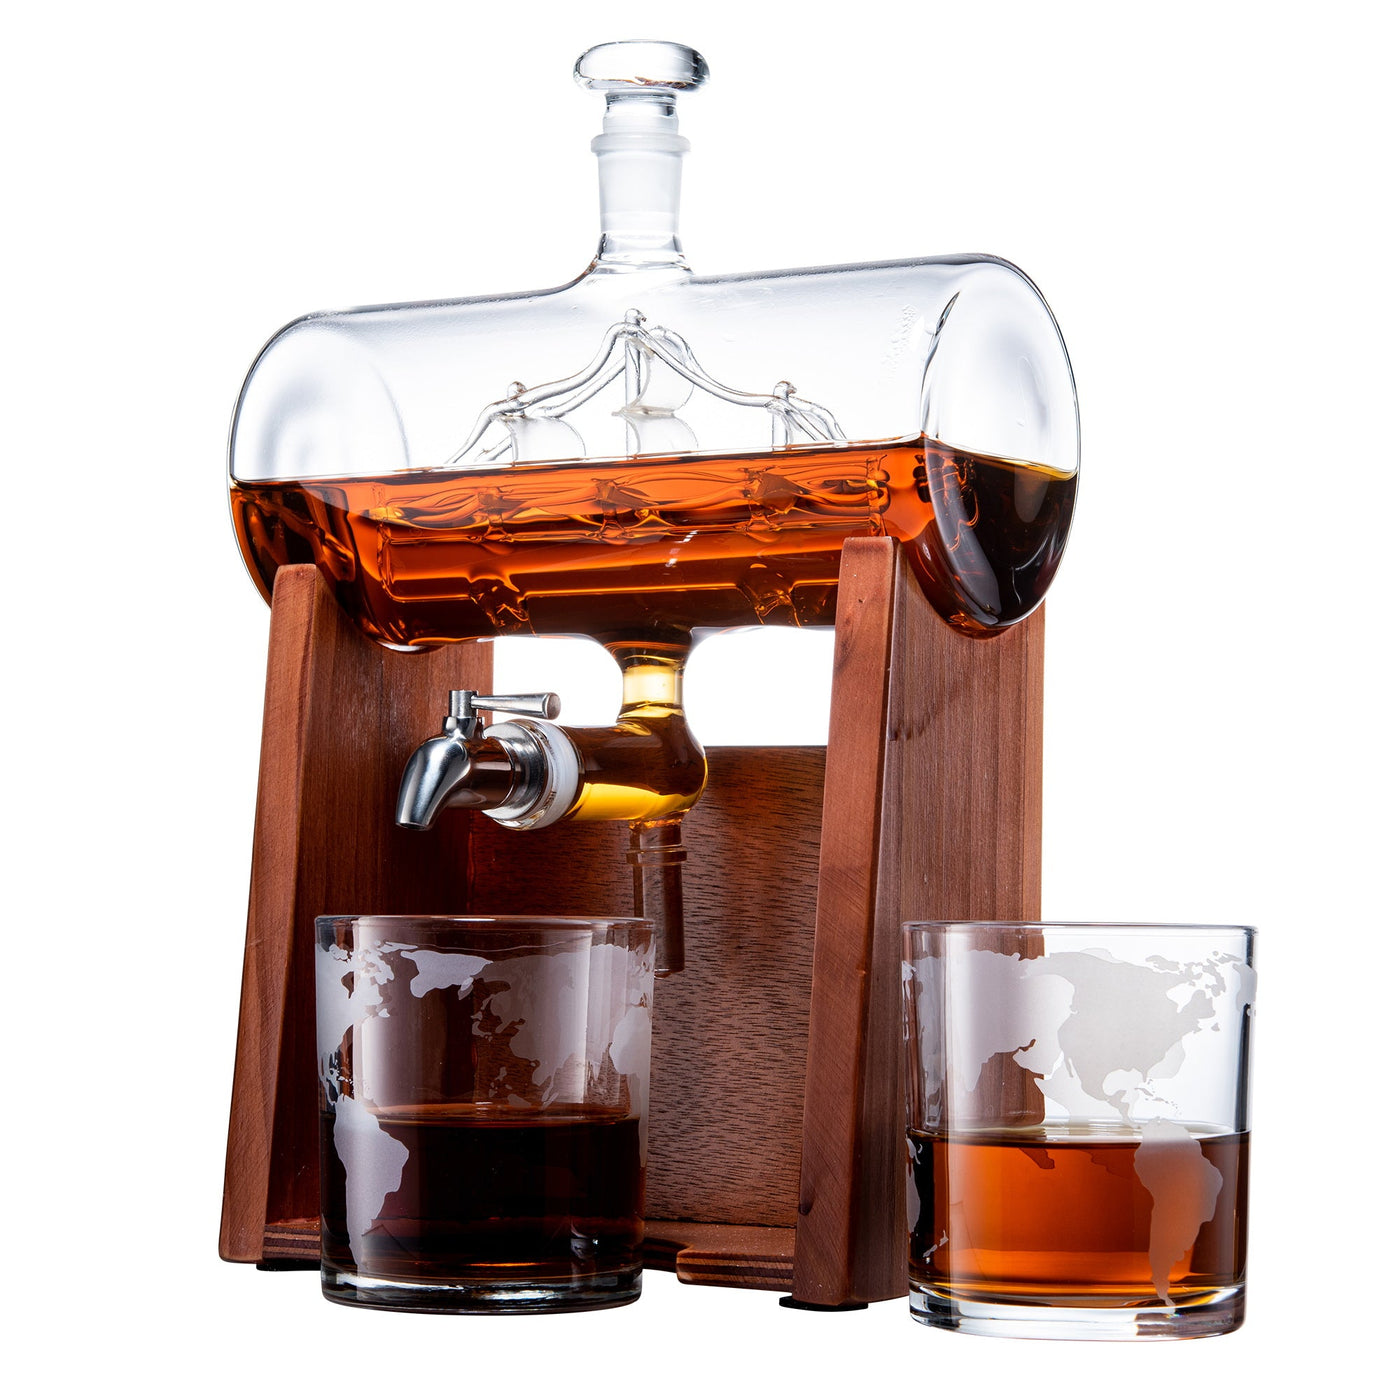 Whiskey & Wine Decanter Set 1250ml with 2 Whiskey Glasses, Liquor Dispenser For Home Bar, Ship Whiskey & Wine Decanter - Gift for Dad, Husband or Boyfriend - Liquor Lux Lead-Free Crystal Glass